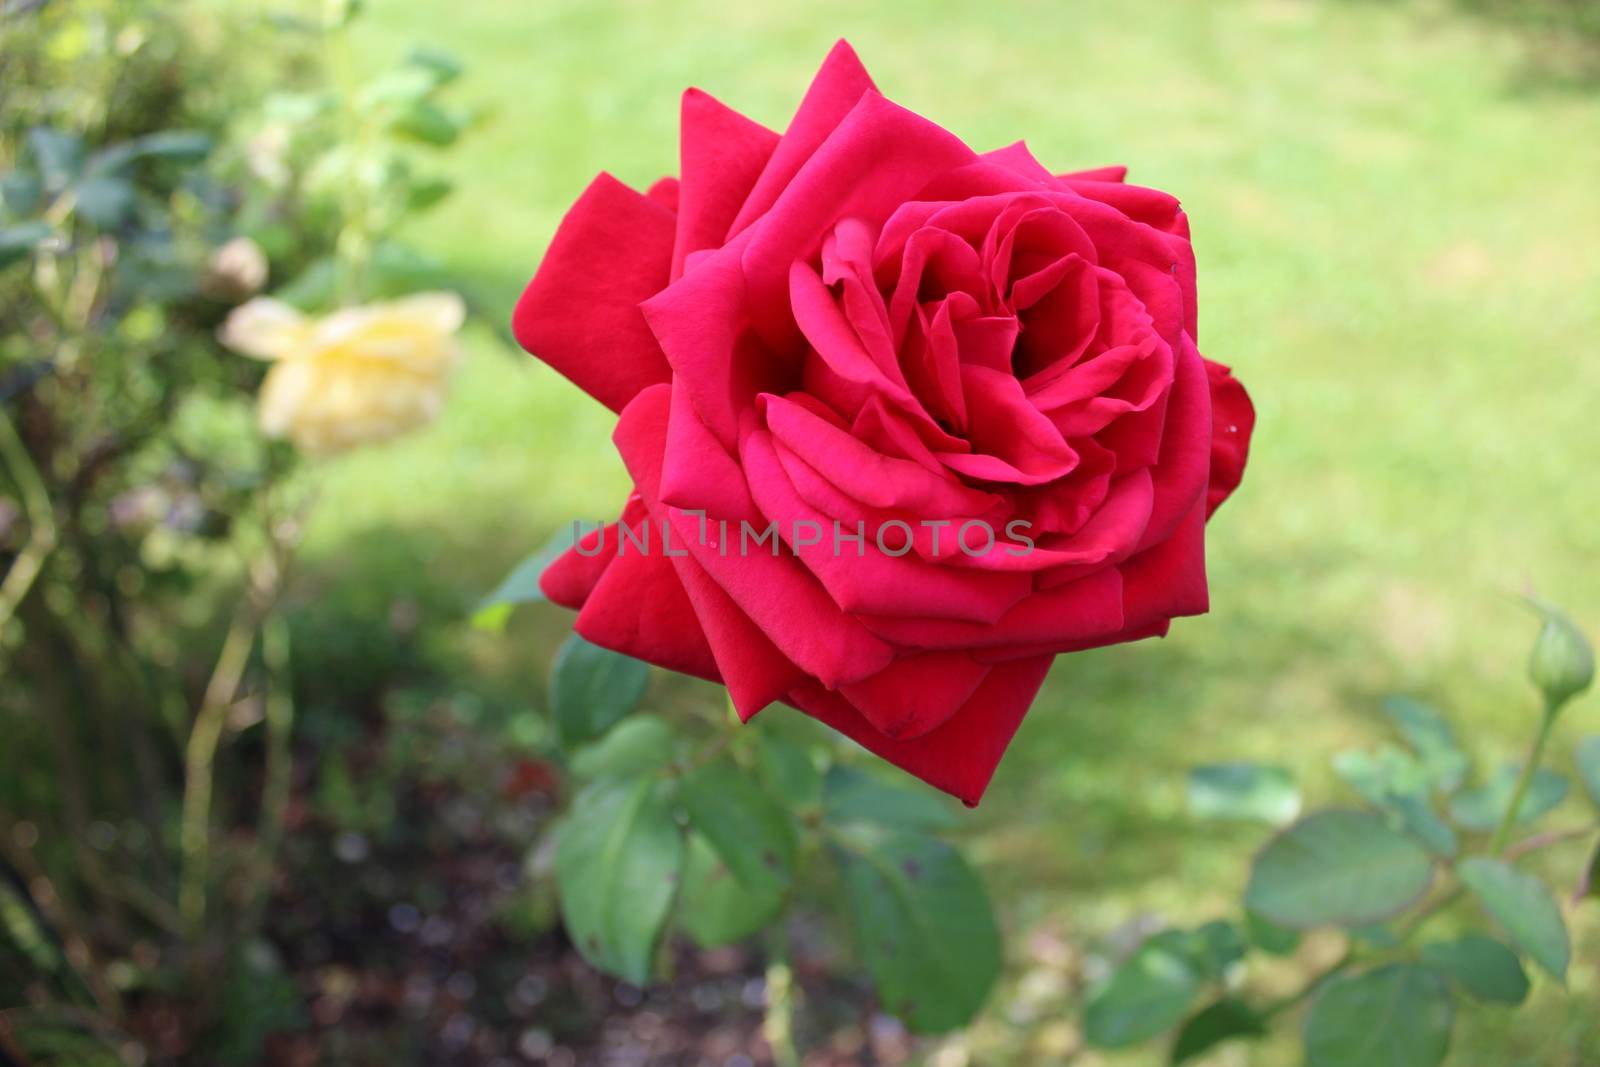 The picture shows red roses in the garden.